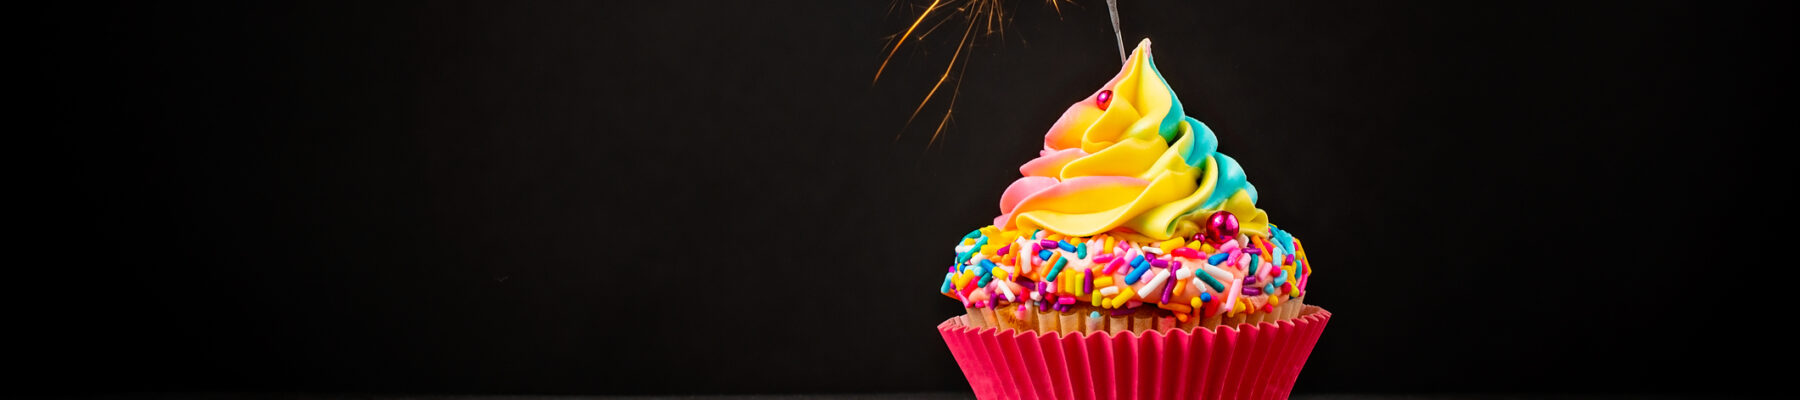 Colorful Birthday Cupcake with Sparkler